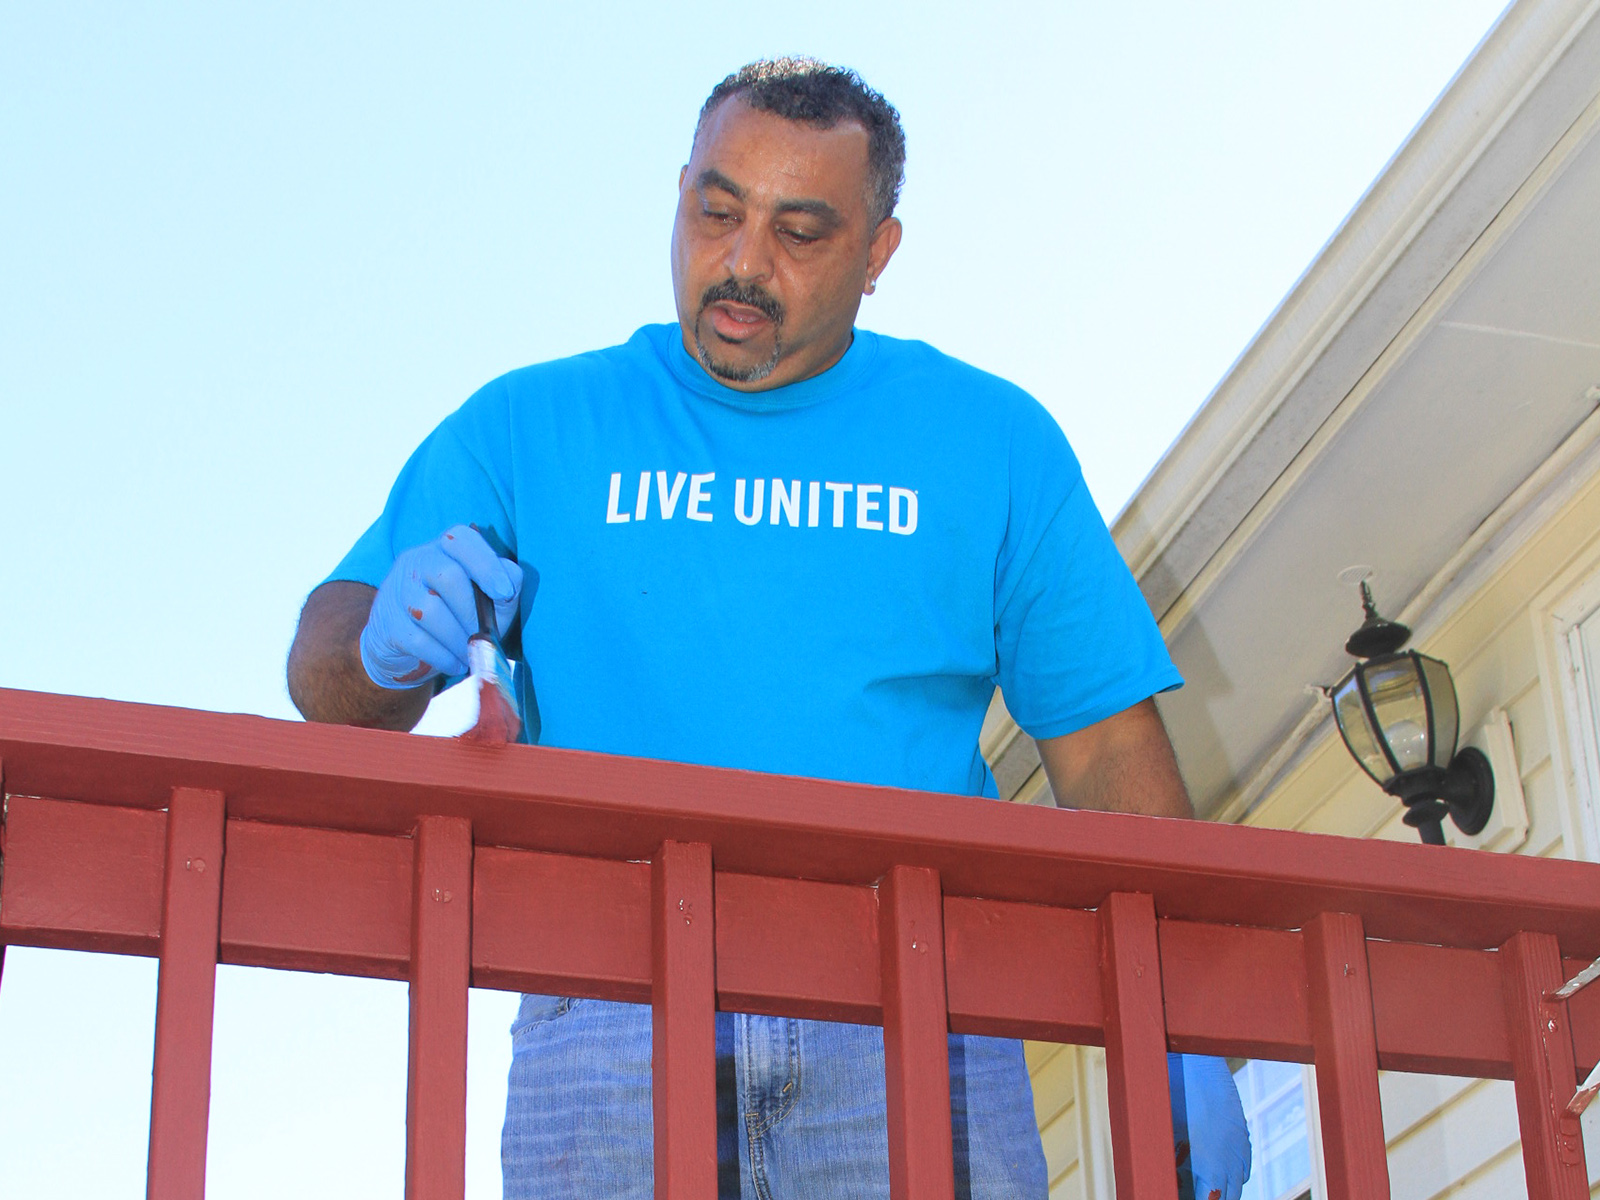 Volunteer in Live United tee shirt painting a railing